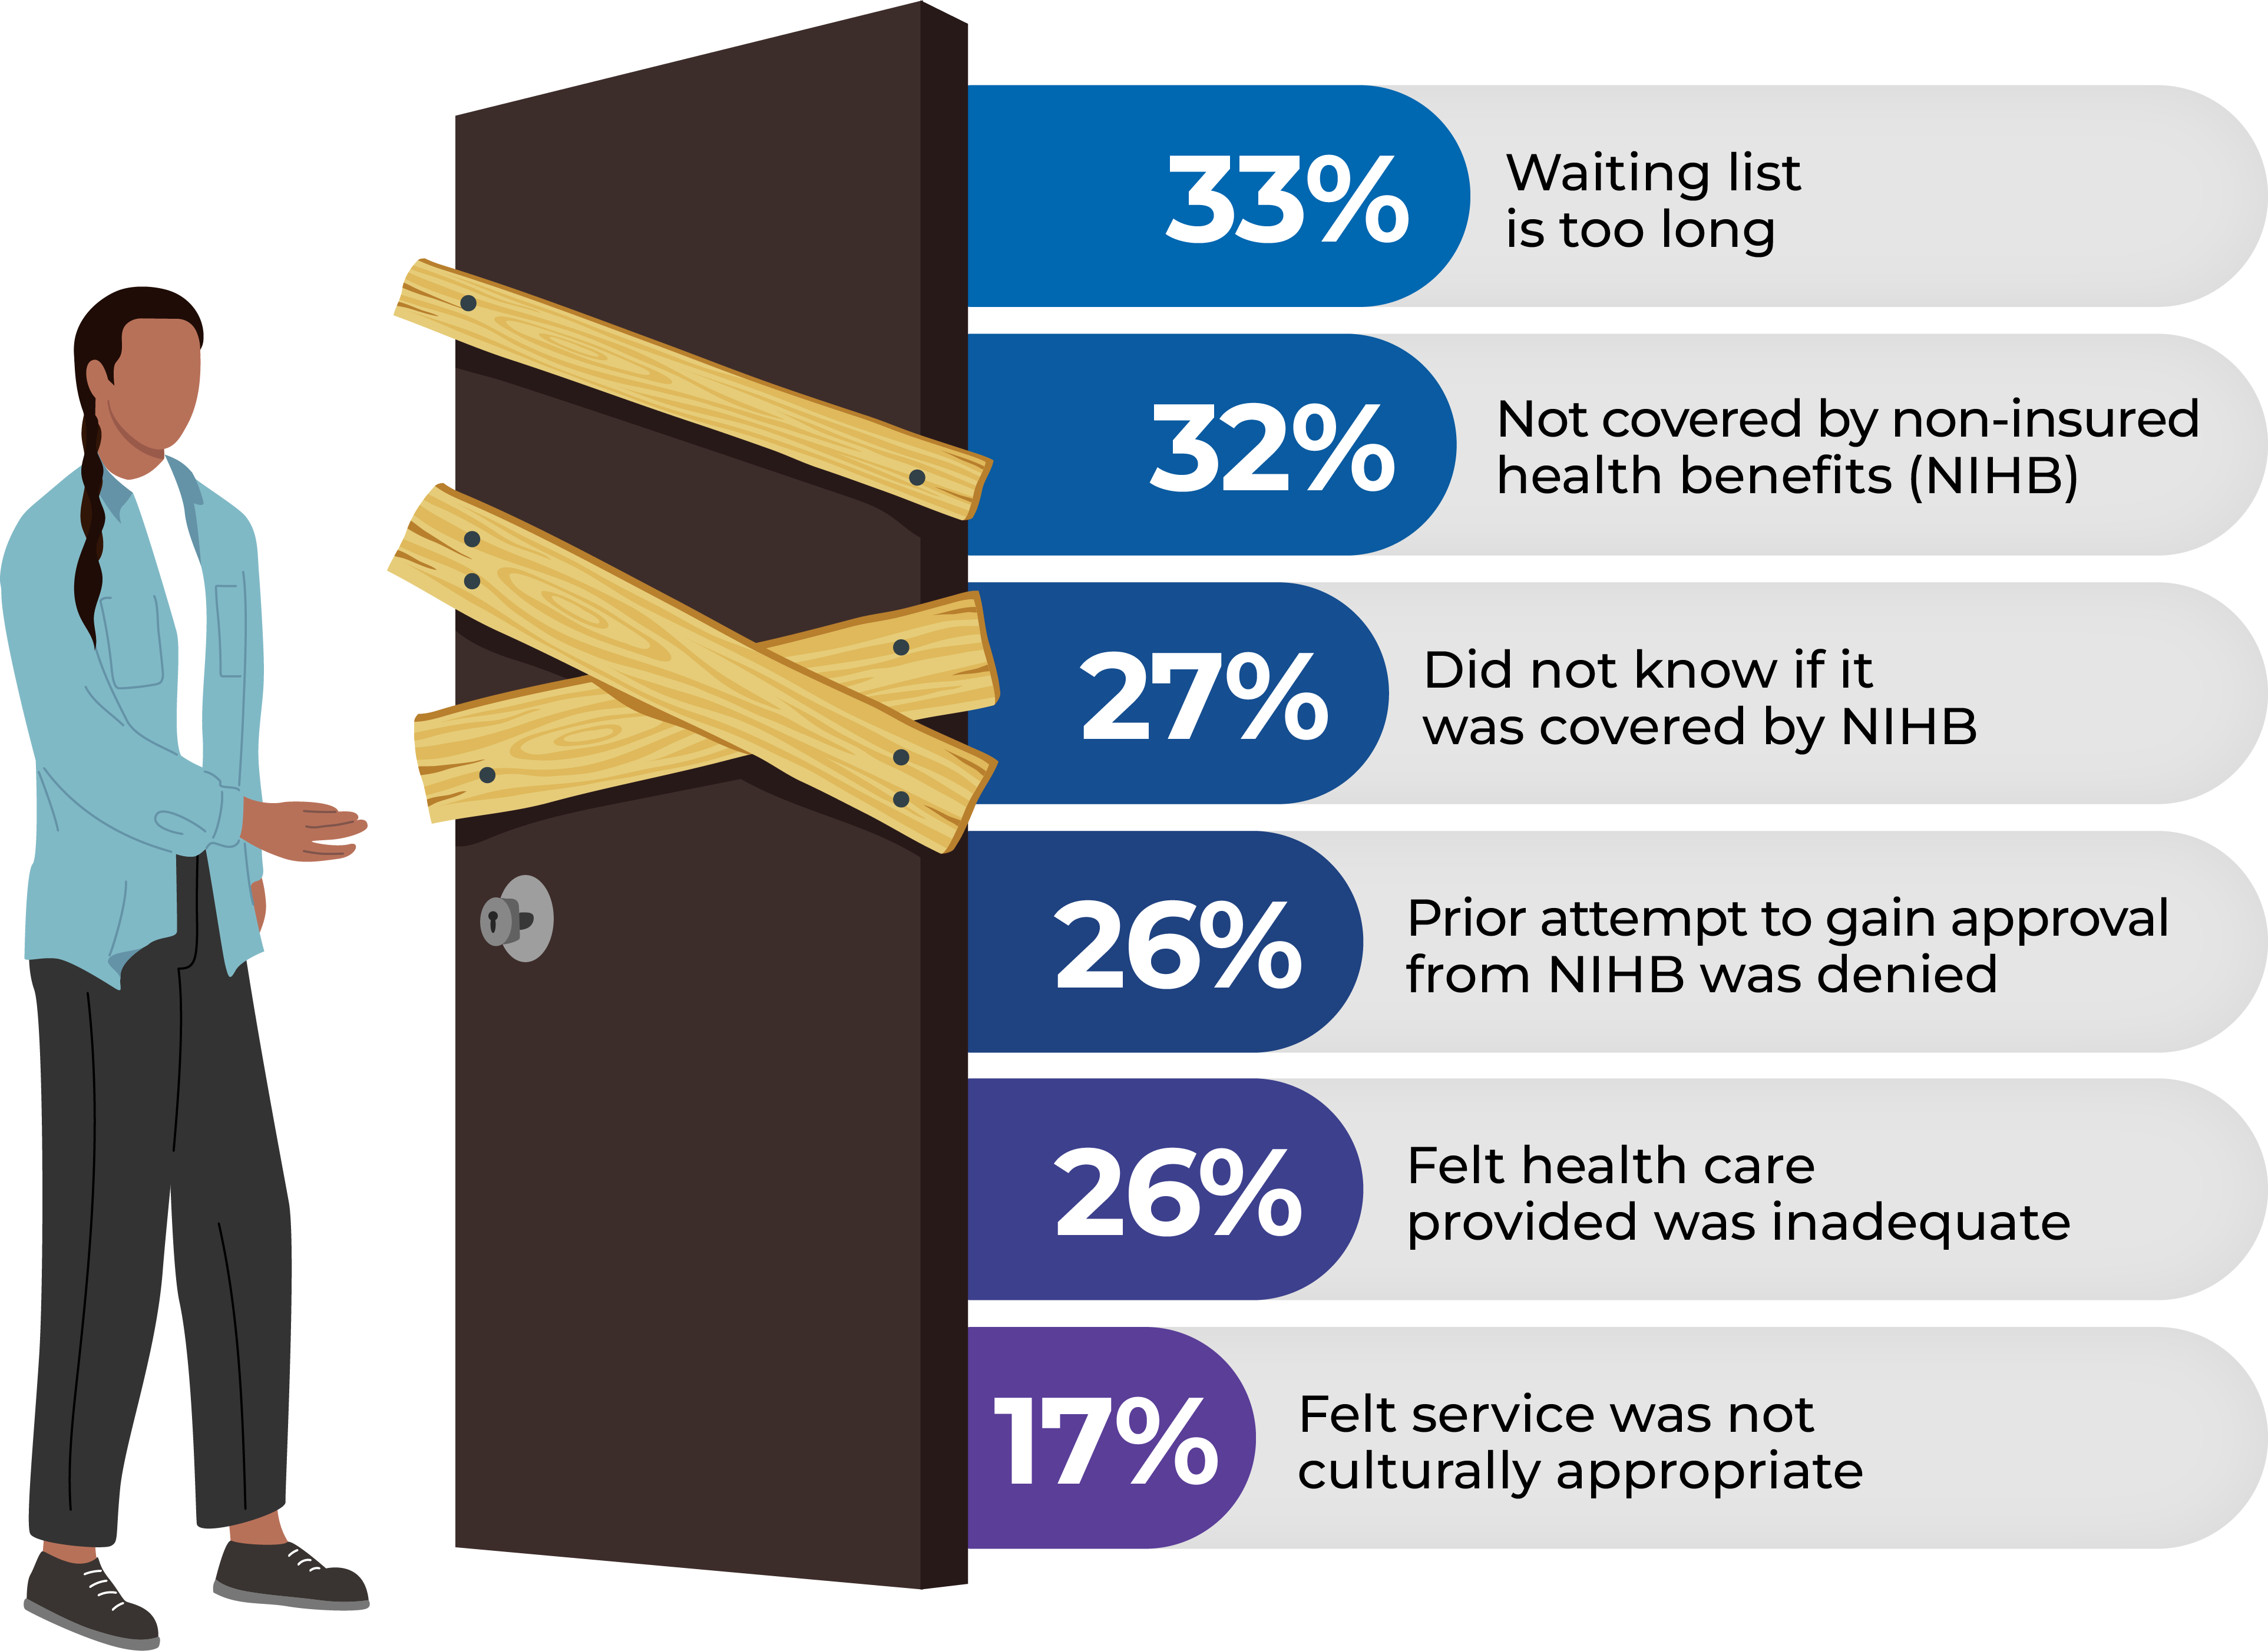 33% waiting list is too long. 32% not covered by NIHB. 27% did not know it was covered by NIHB. 26% prior attempt to gain approval from NIHB was denied. 26% felt health care provided was inadequate. 17% felt service was not culturally appropriate.